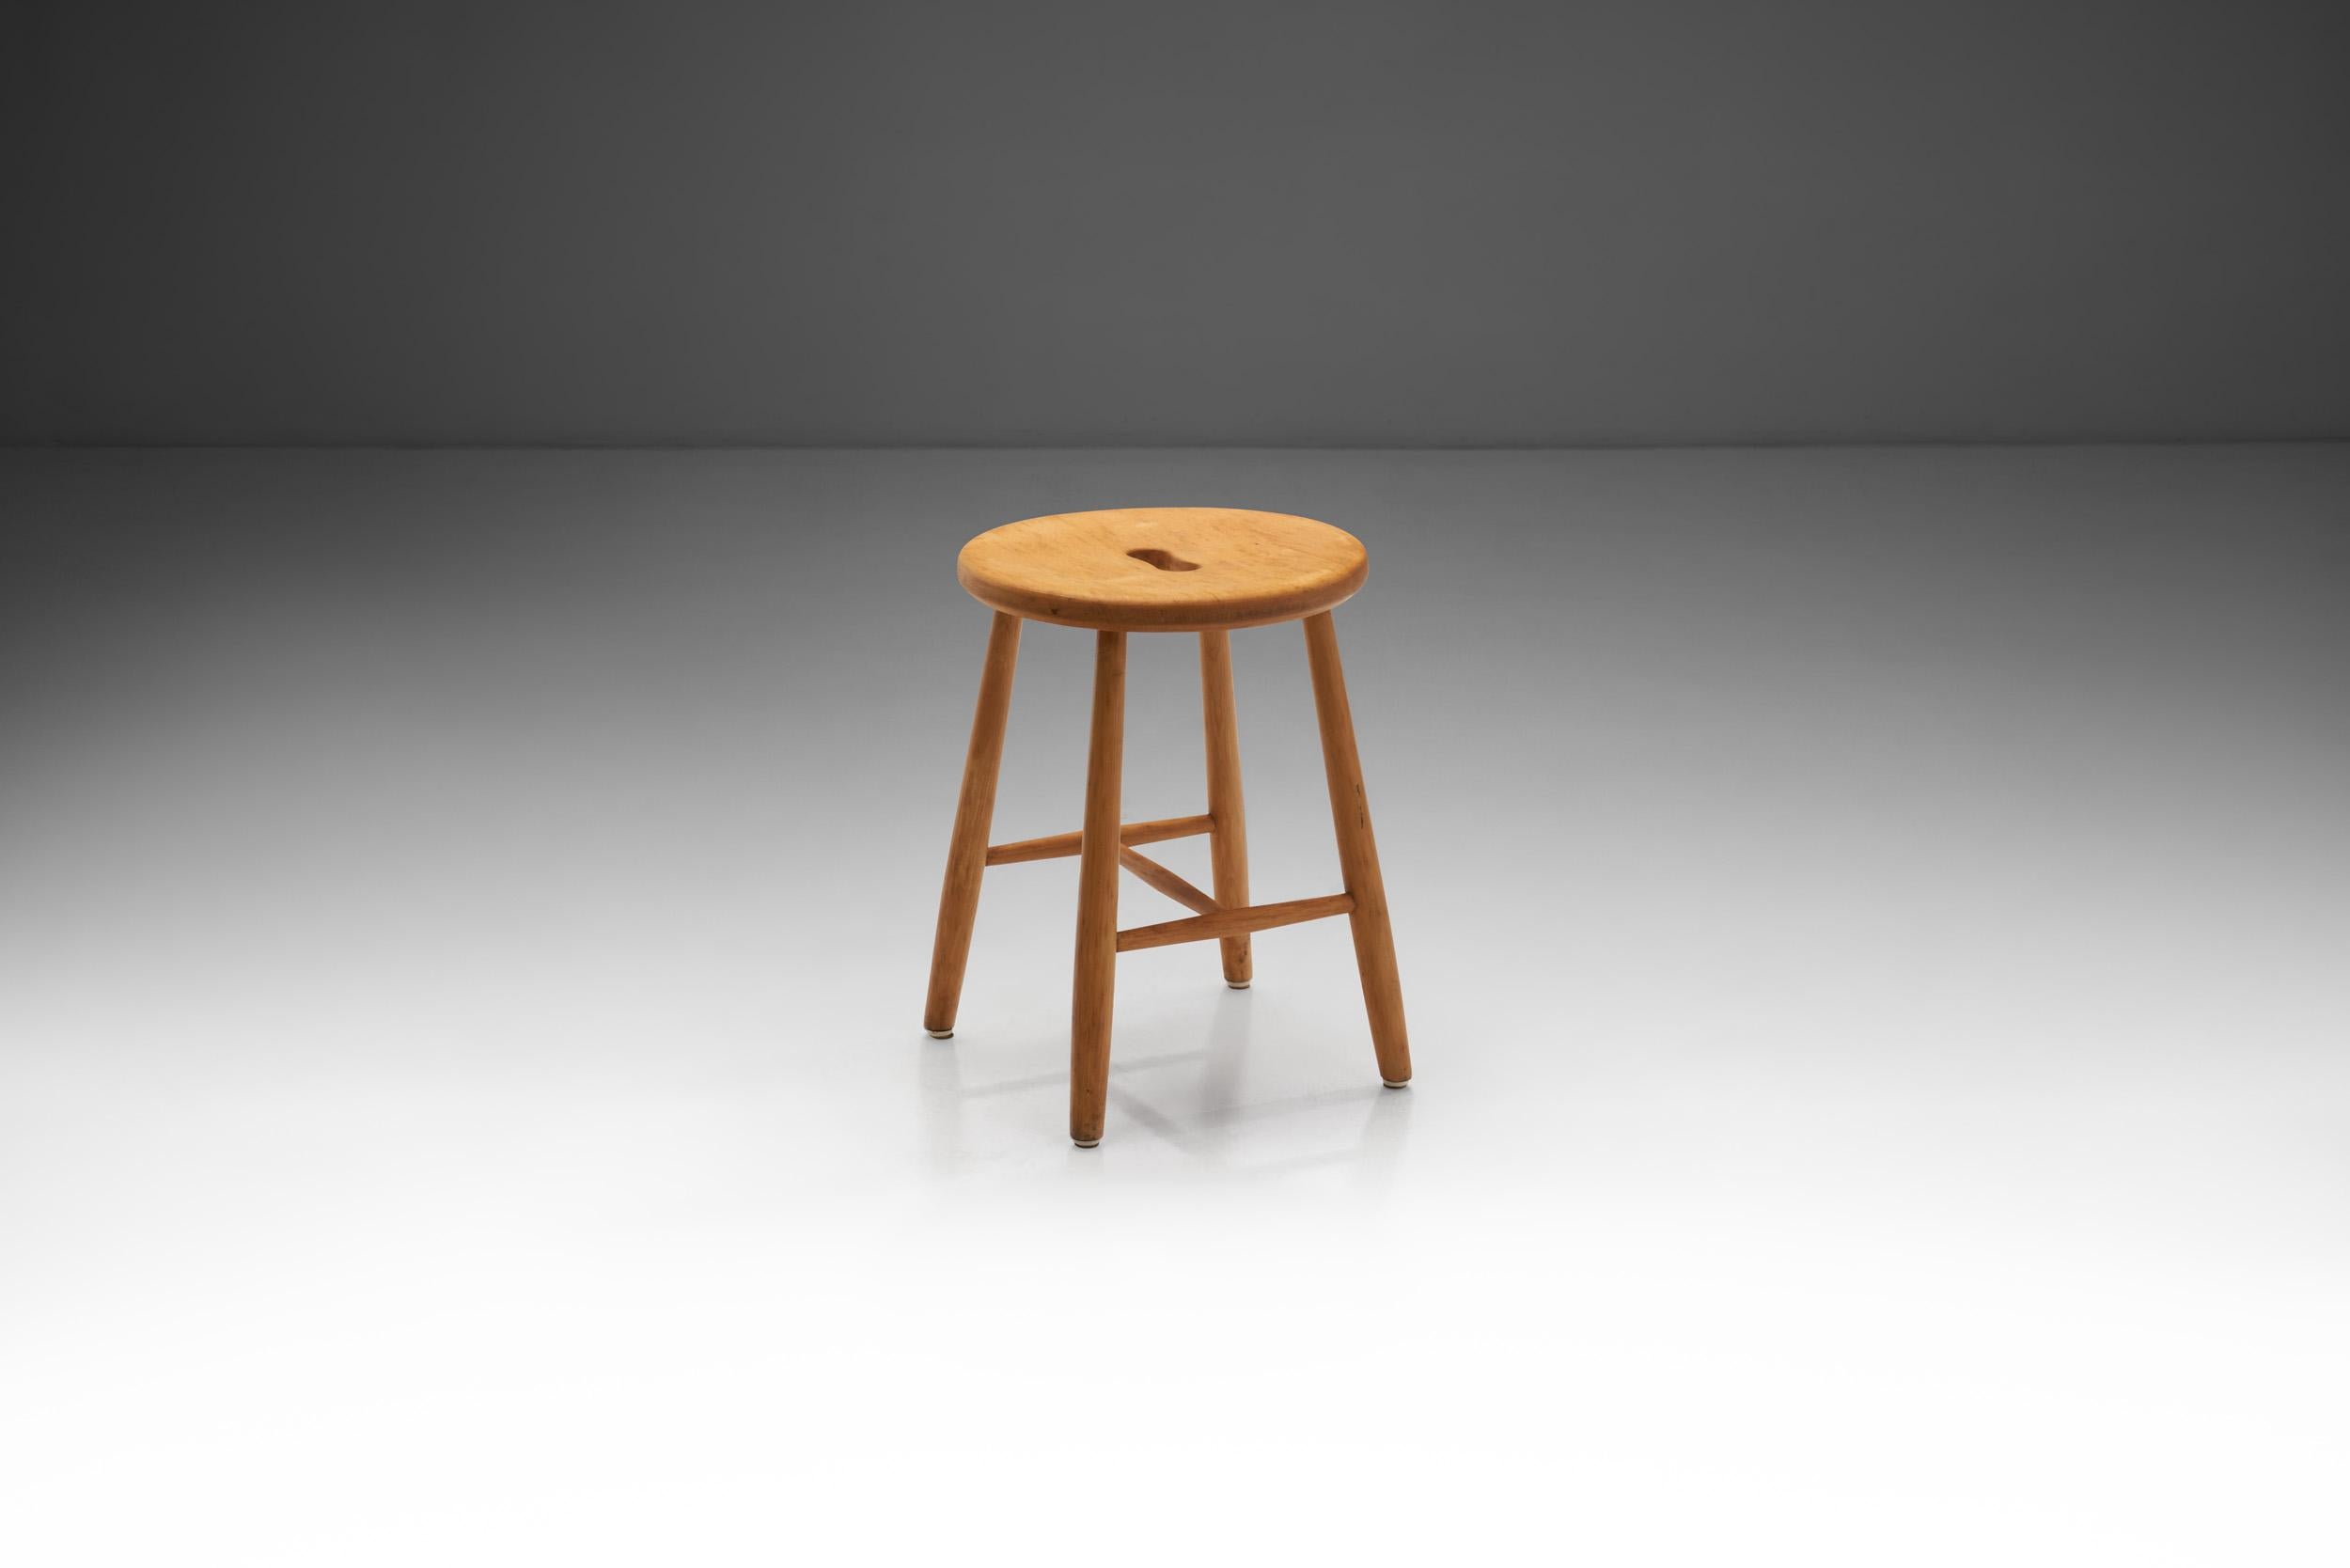 Designed by Børge Mogensen in 1955, the “J27” stool remains a solid and practical piece. With a multitude of purposes, form and function remain at the forefront of this design. Almost everyone in Denmark has experienced Børge Mogensen’s designs –